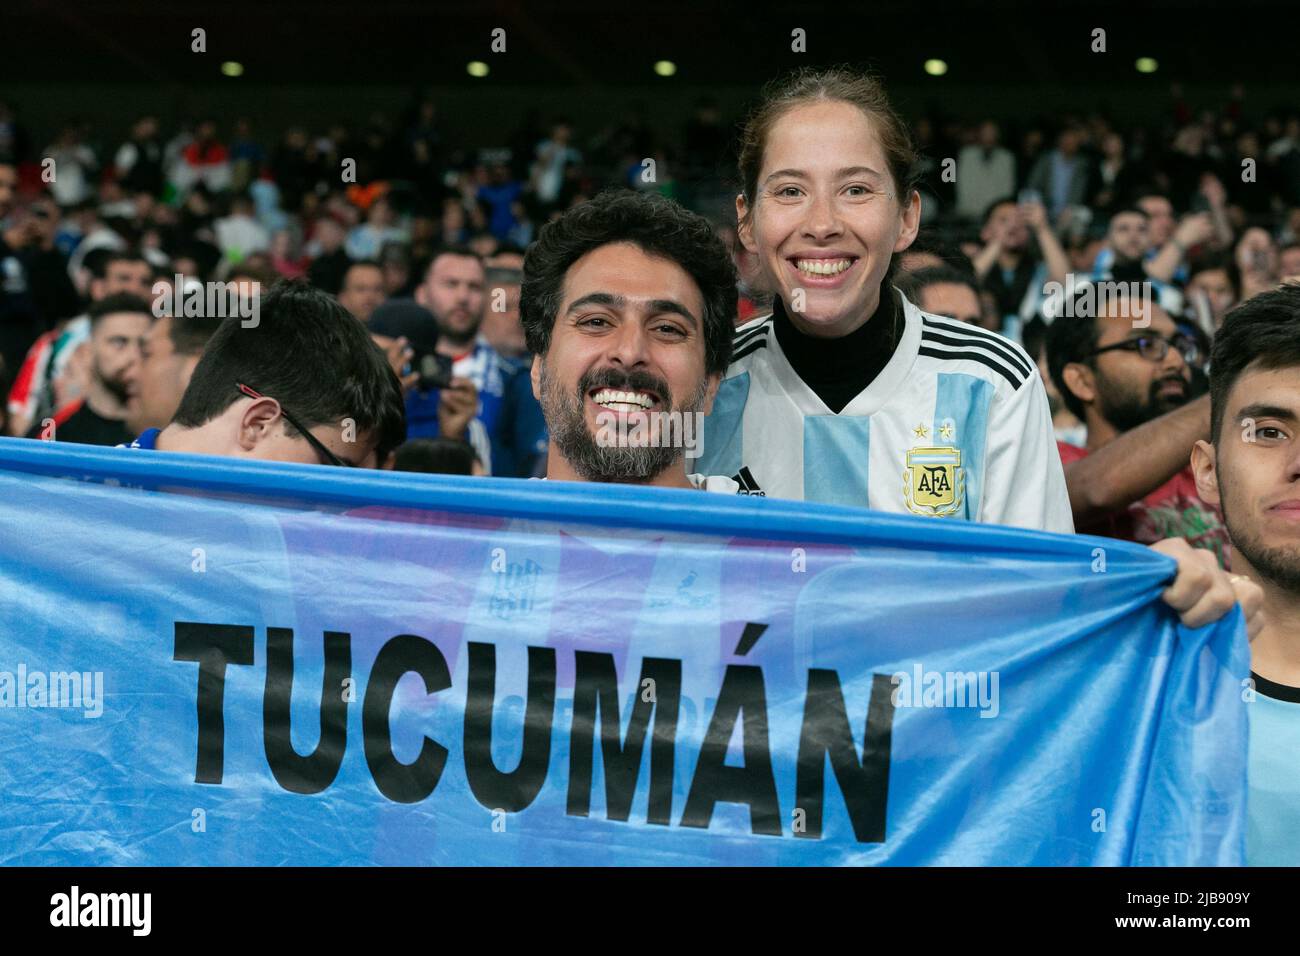 Supporters of Tucumán, Argentina after the Italy v Argentina - Finalissima 2022 match at Wembley Stadium on June 1, 2022 in London, England.(MB Media) Stock Photo